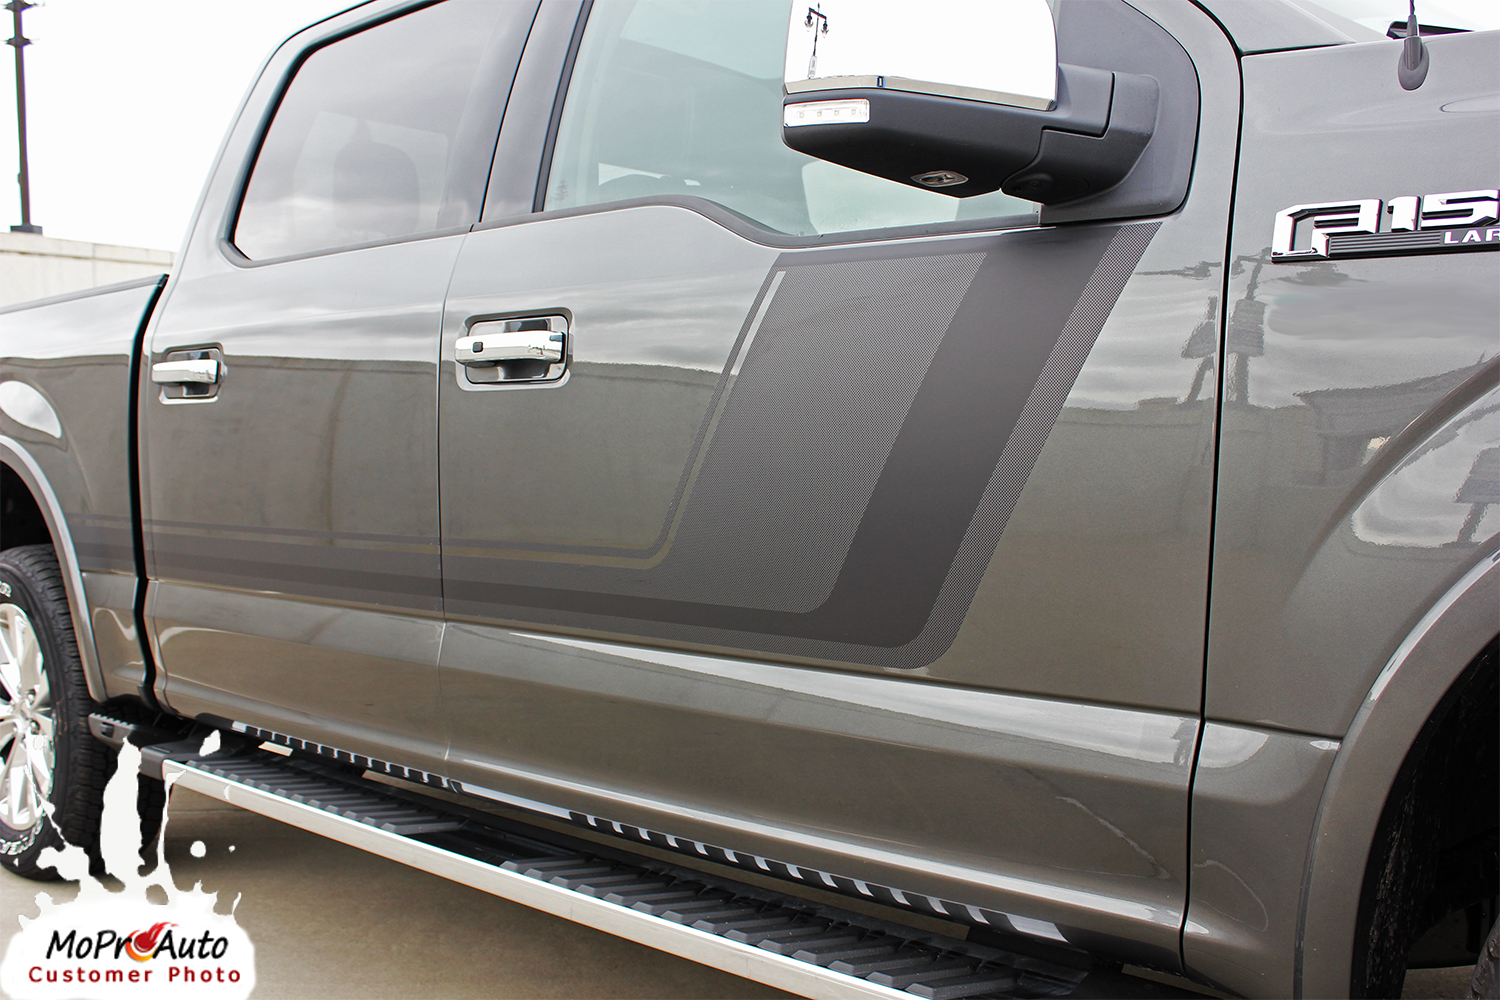 2021, 2022, 2023 Ford F-Series F-150 Vinyl Graphics Stripes and Decals Kit Tremor FX Appearance Package Style by MoProAuto Pro Design Series